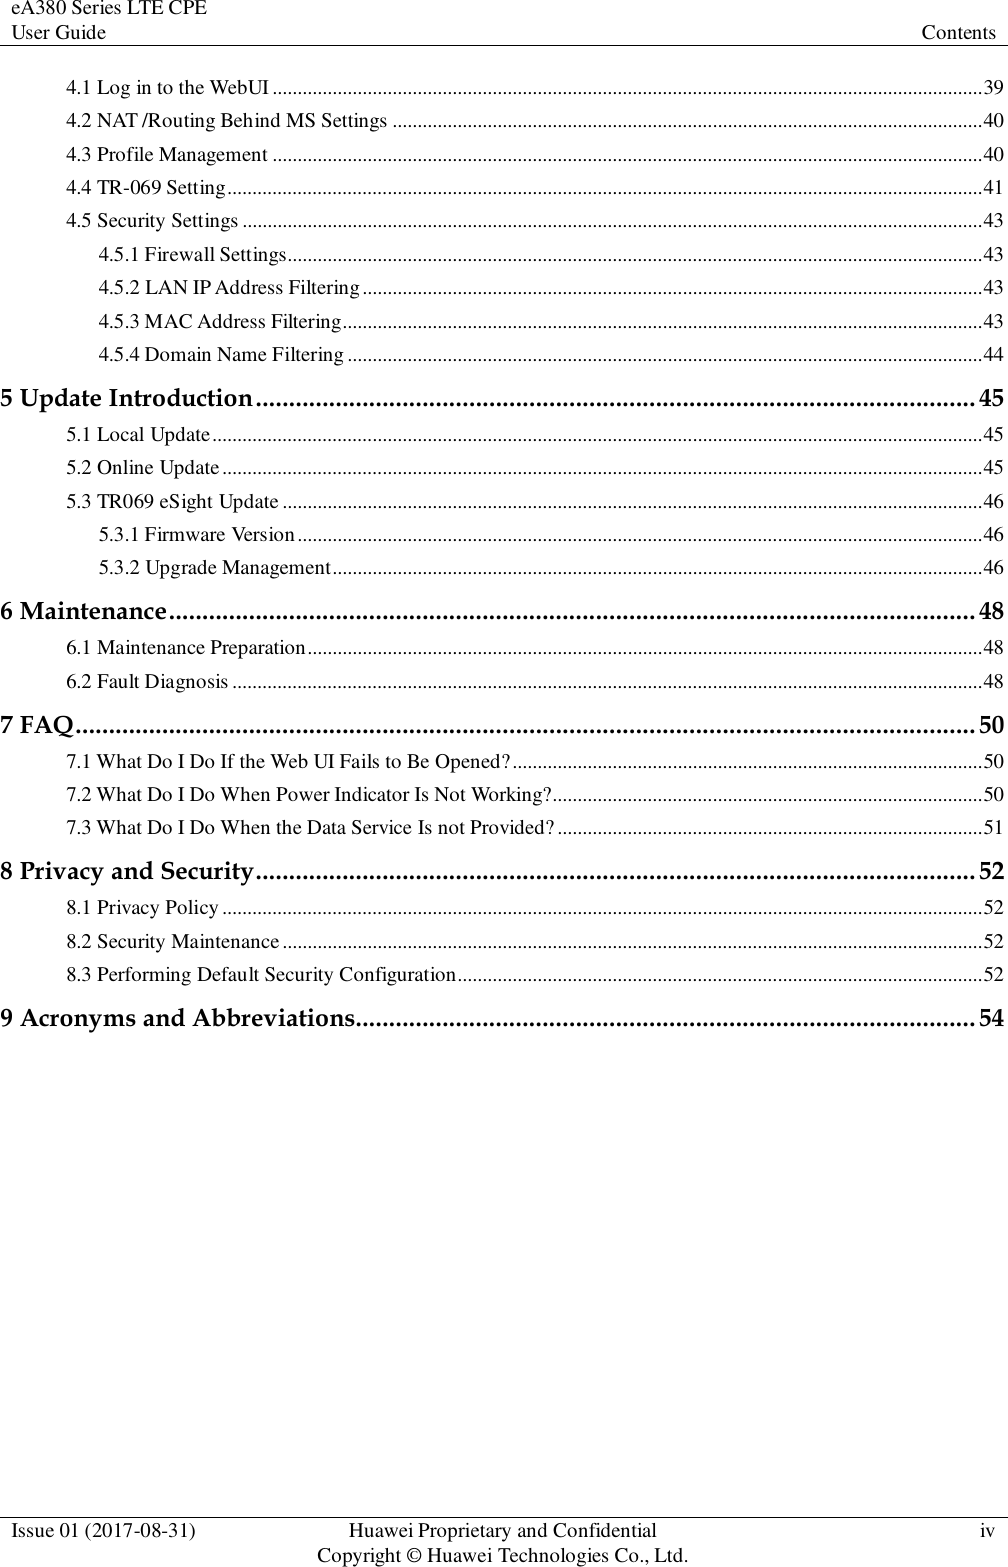 eA380 Series LTE CPE User Guide  Contents  Issue 01 (2017-08-31)  Huawei Proprietary and Confidential                                     Copyright © Huawei Technologies Co., Ltd.  iv  4.1 Log in to the WebUI .............................................................................................................................................. 39 4.2 NAT /Routing Behind MS Settings ...................................................................................................................... 40 4.3 Profile Management .............................................................................................................................................. 40 4.4 TR-069 Setting ....................................................................................................................................................... 41 4.5 Security Settings .................................................................................................................................................... 43 4.5.1 Firewall Settings........................................................................................................................................... 43 4.5.2 LAN IP Address Filtering ............................................................................................................................ 43 4.5.3 MAC Address Filtering................................................................................................................................ 43 4.5.4 Domain Name Filtering ............................................................................................................................... 44 5 Update Introduction ............................................................................................................ 45 5.1 Local Update .......................................................................................................................................................... 45 5.2 Online Update ........................................................................................................................................................ 45 5.3 TR069 eSight Update ............................................................................................................................................ 46 5.3.1 Firmware Version ......................................................................................................................................... 46 5.3.2 Upgrade Management .................................................................................................................................. 46 6 Maintenance ......................................................................................................................... 48 6.1 Maintenance Preparation ....................................................................................................................................... 48 6.2 Fault Diagnosis ...................................................................................................................................................... 48 7 FAQ ....................................................................................................................................... 50 7.1 What Do I Do If the Web UI Fails to Be Opened? .............................................................................................. 50 7.2 What Do I Do When Power Indicator Is Not Working?...................................................................................... 50 7.3 What Do I Do When the Data Service Is not Provided? ..................................................................................... 51 8 Privacy and Security ............................................................................................................ 52 8.1 Privacy Policy ........................................................................................................................................................ 52 8.2 Security Maintenance ............................................................................................................................................ 52 8.3 Performing Default Security Configuration......................................................................................................... 52 9 Acronyms and Abbreviations............................................................................................. 54 